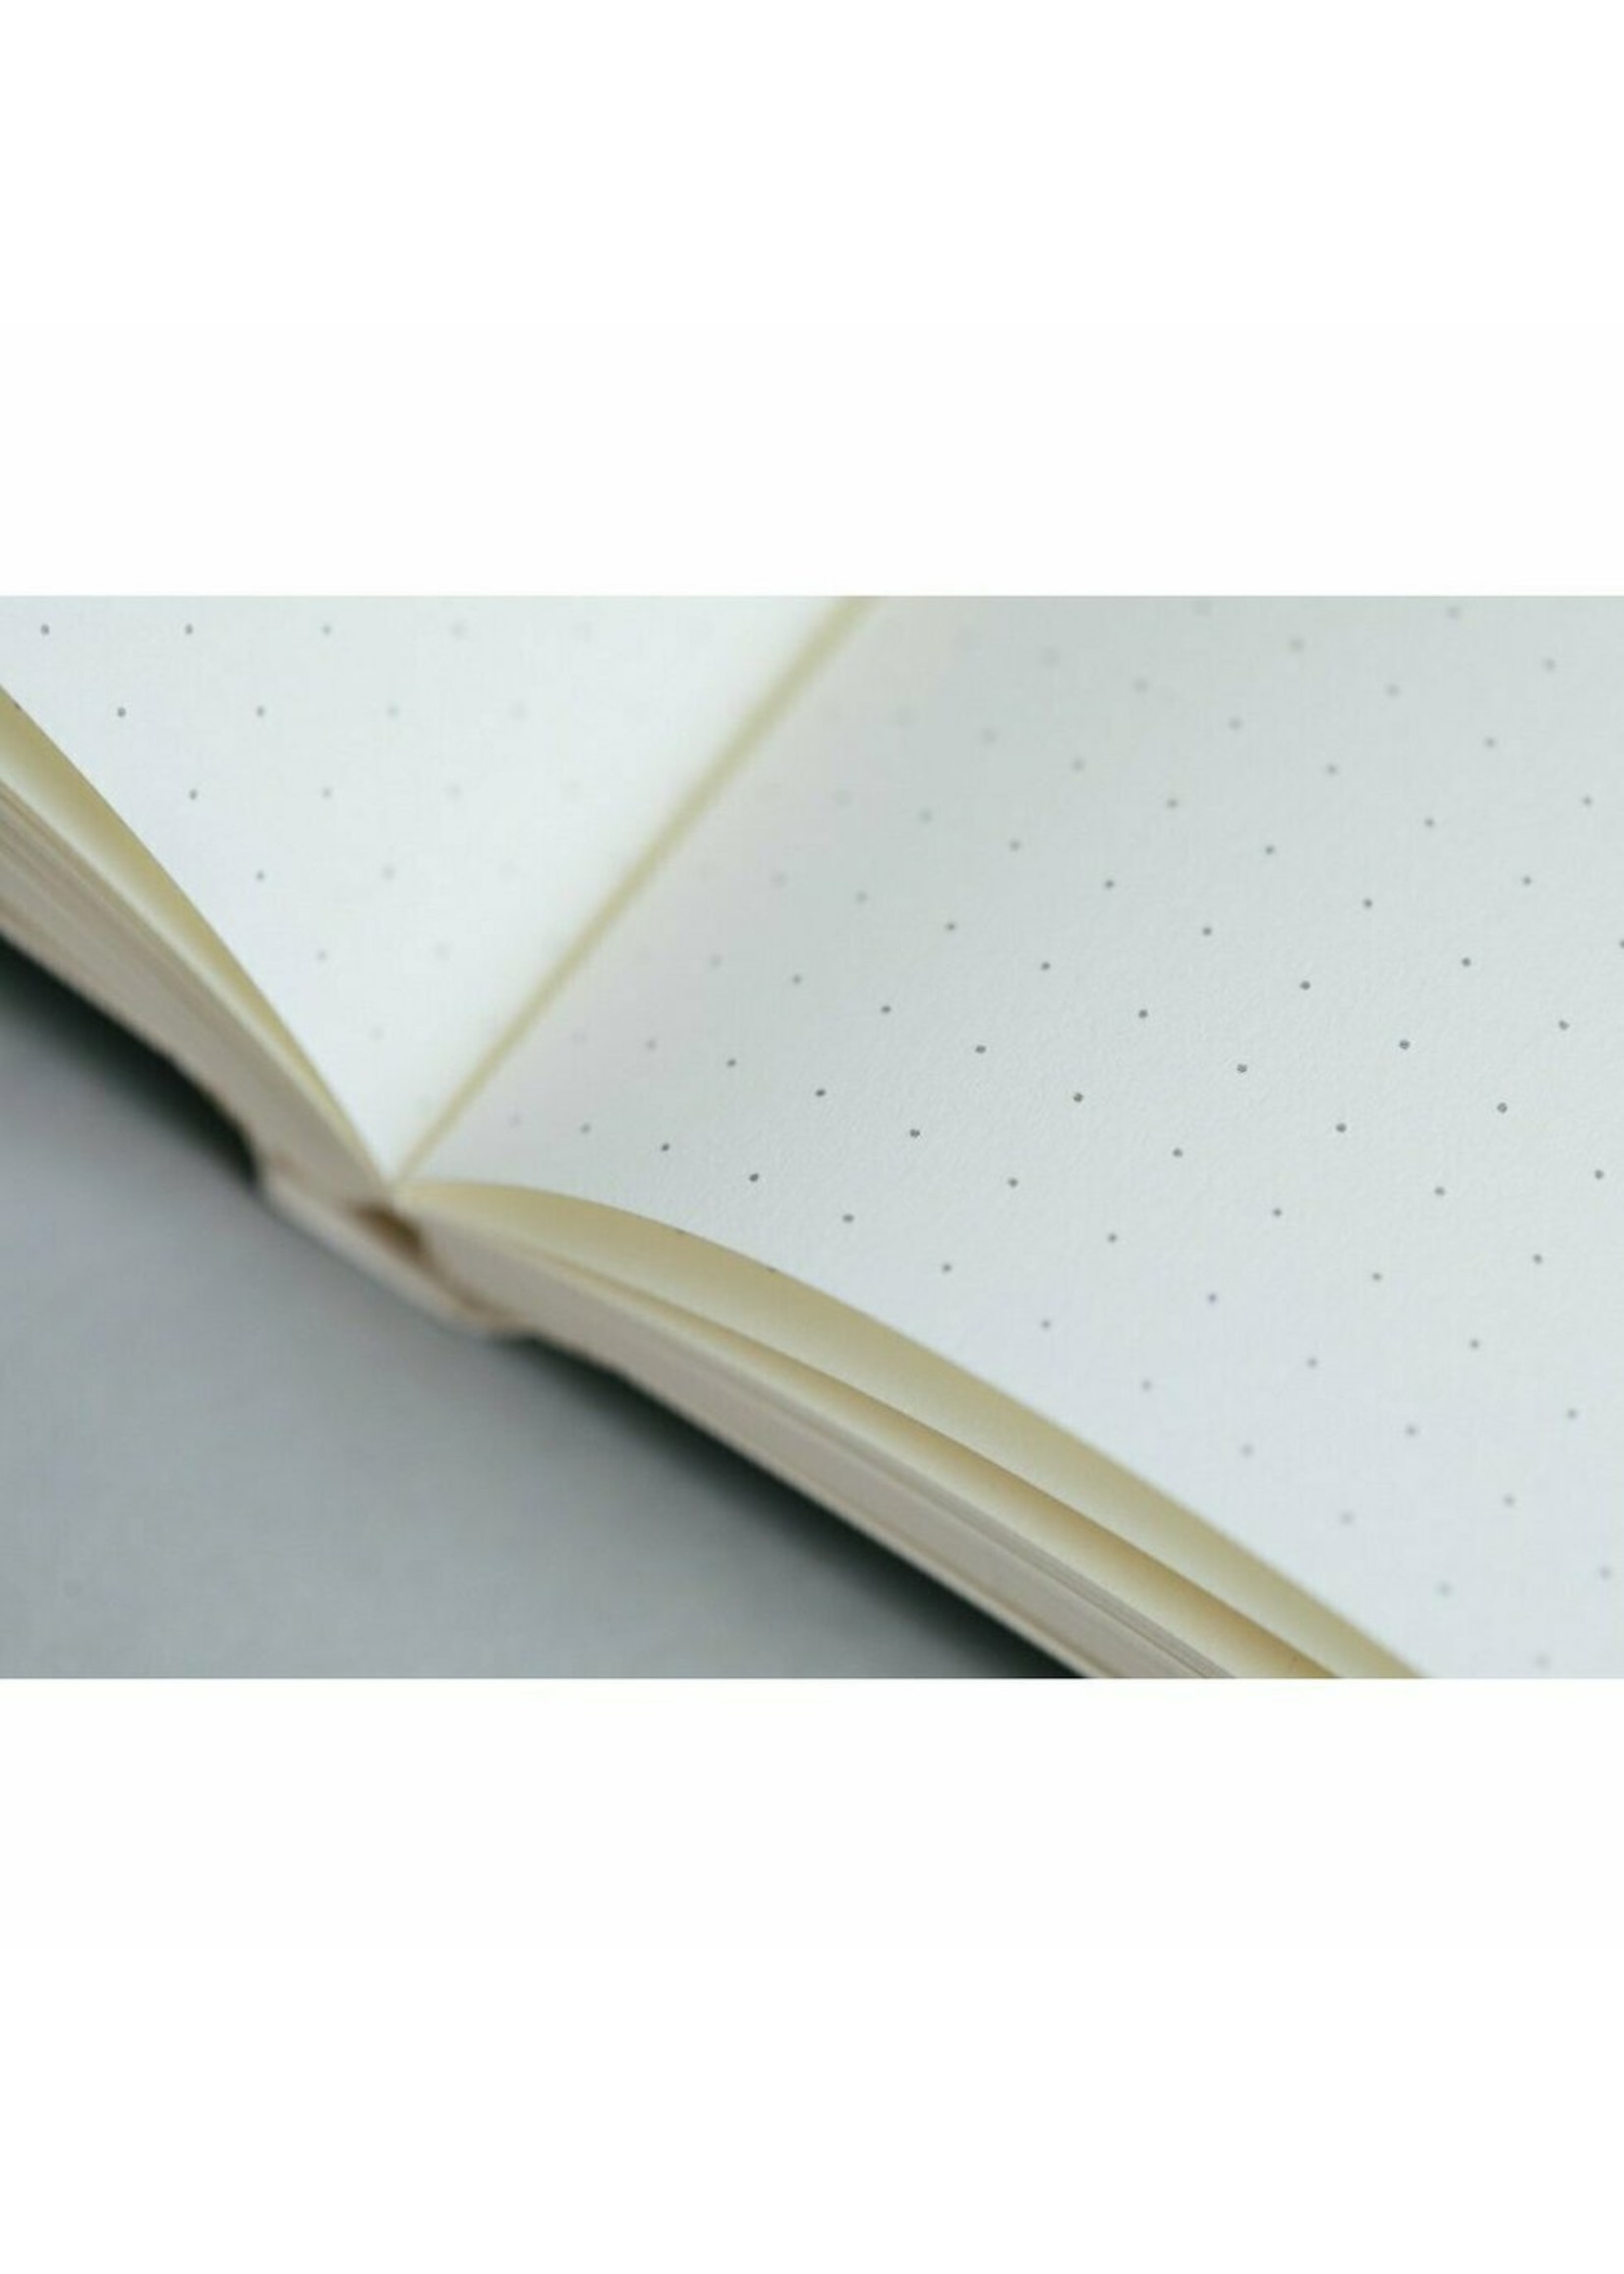 Ola Ola A5 Layflat Notebook dotted pages - Alma print in Salvia Blue